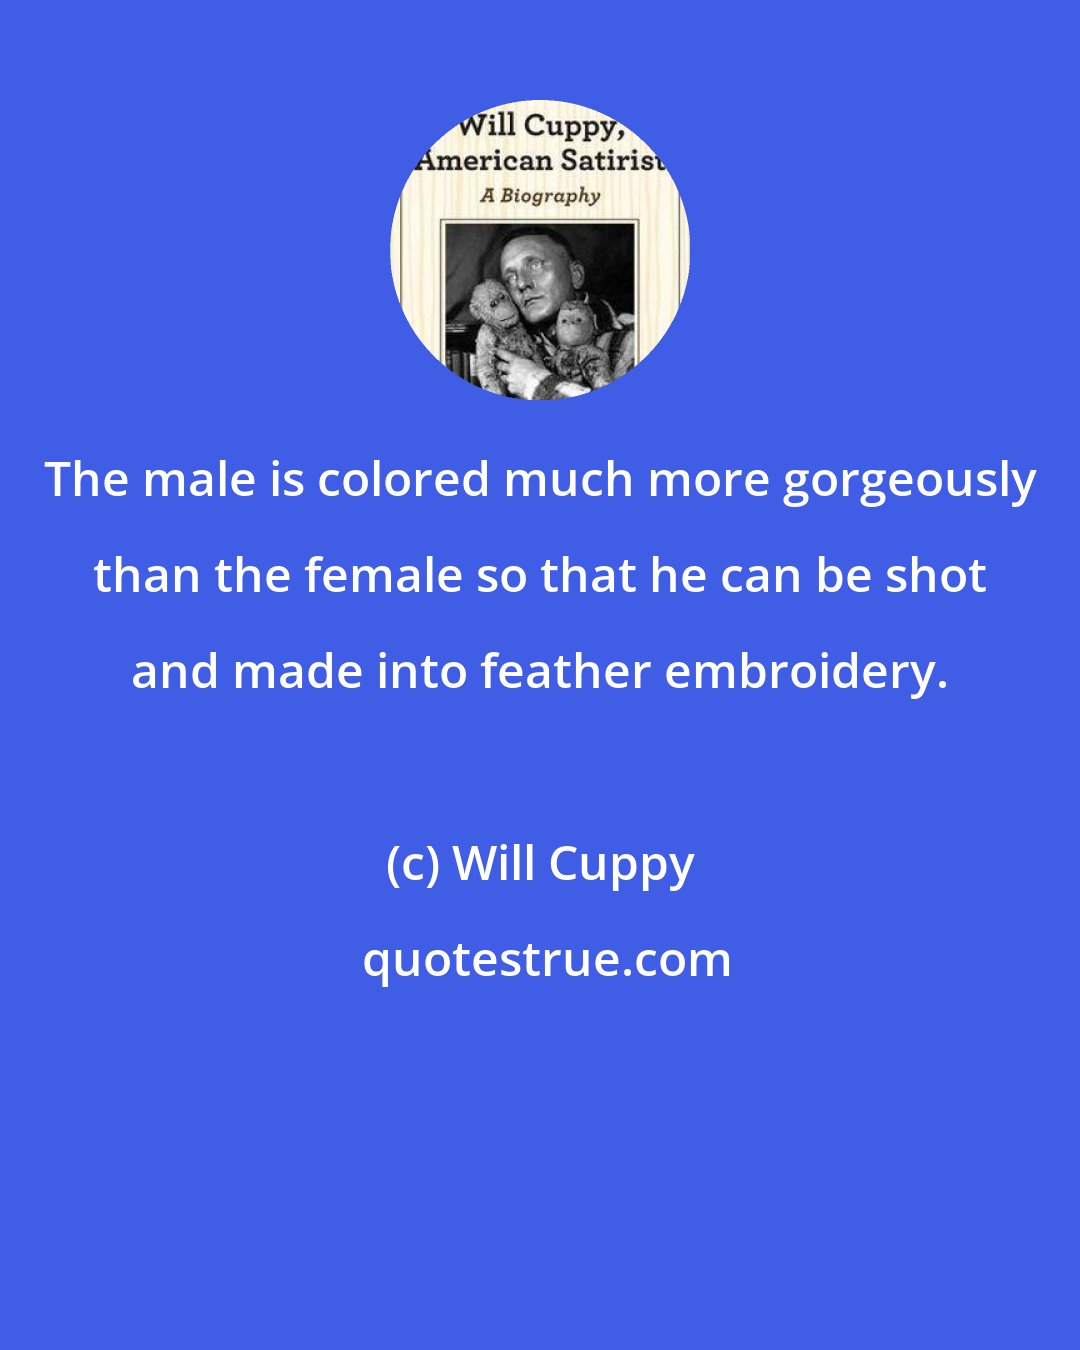 Will Cuppy: The male is colored much more gorgeously than the female so that he can be shot and made into feather embroidery.